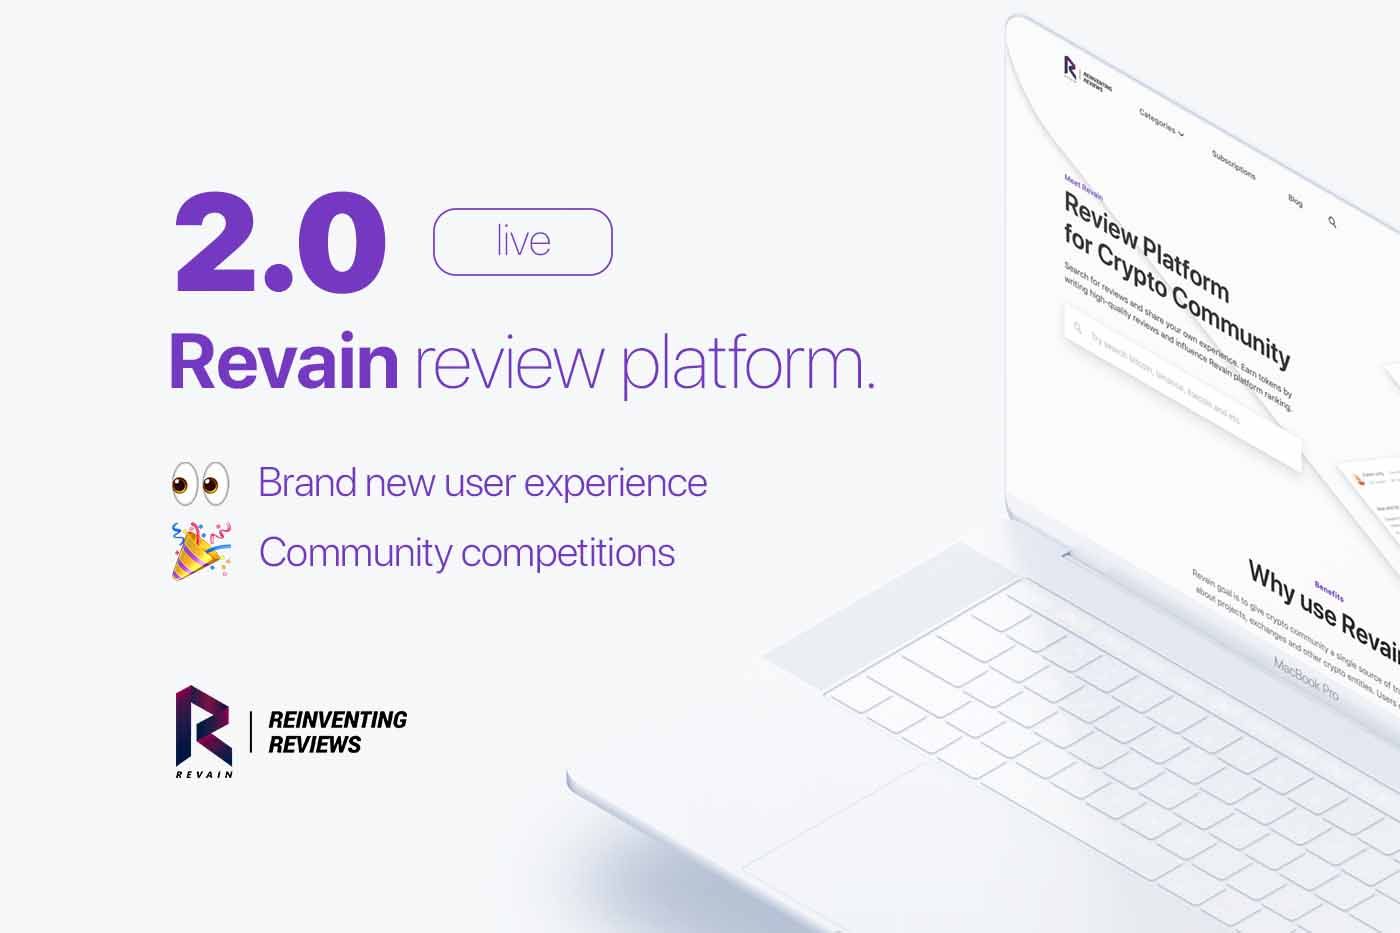 Article Meet Revain 2.0, reworked completely from the ground up